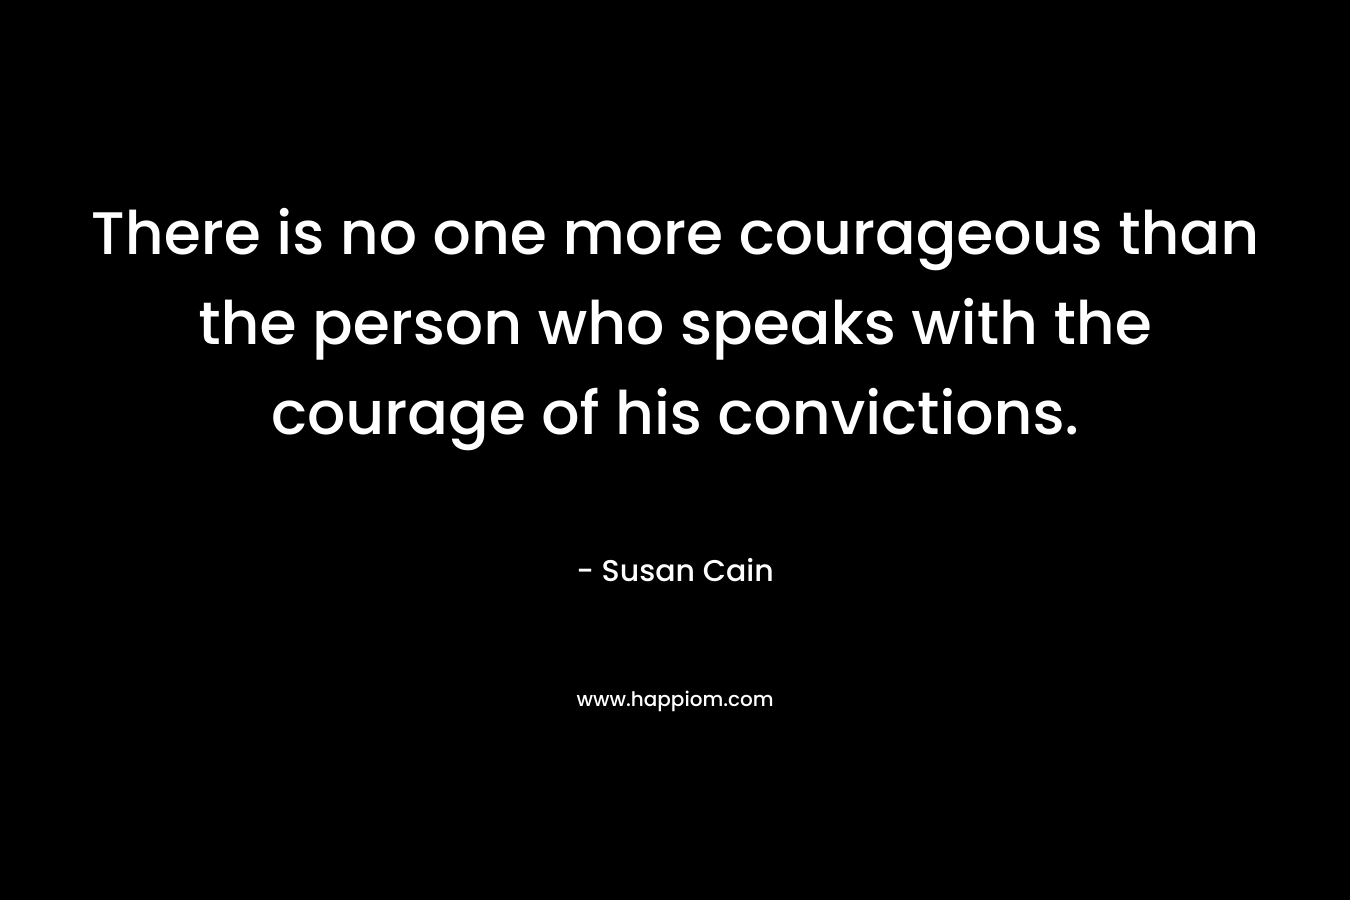 There is no one more courageous than the person who speaks with the courage of his convictions. – Susan Cain